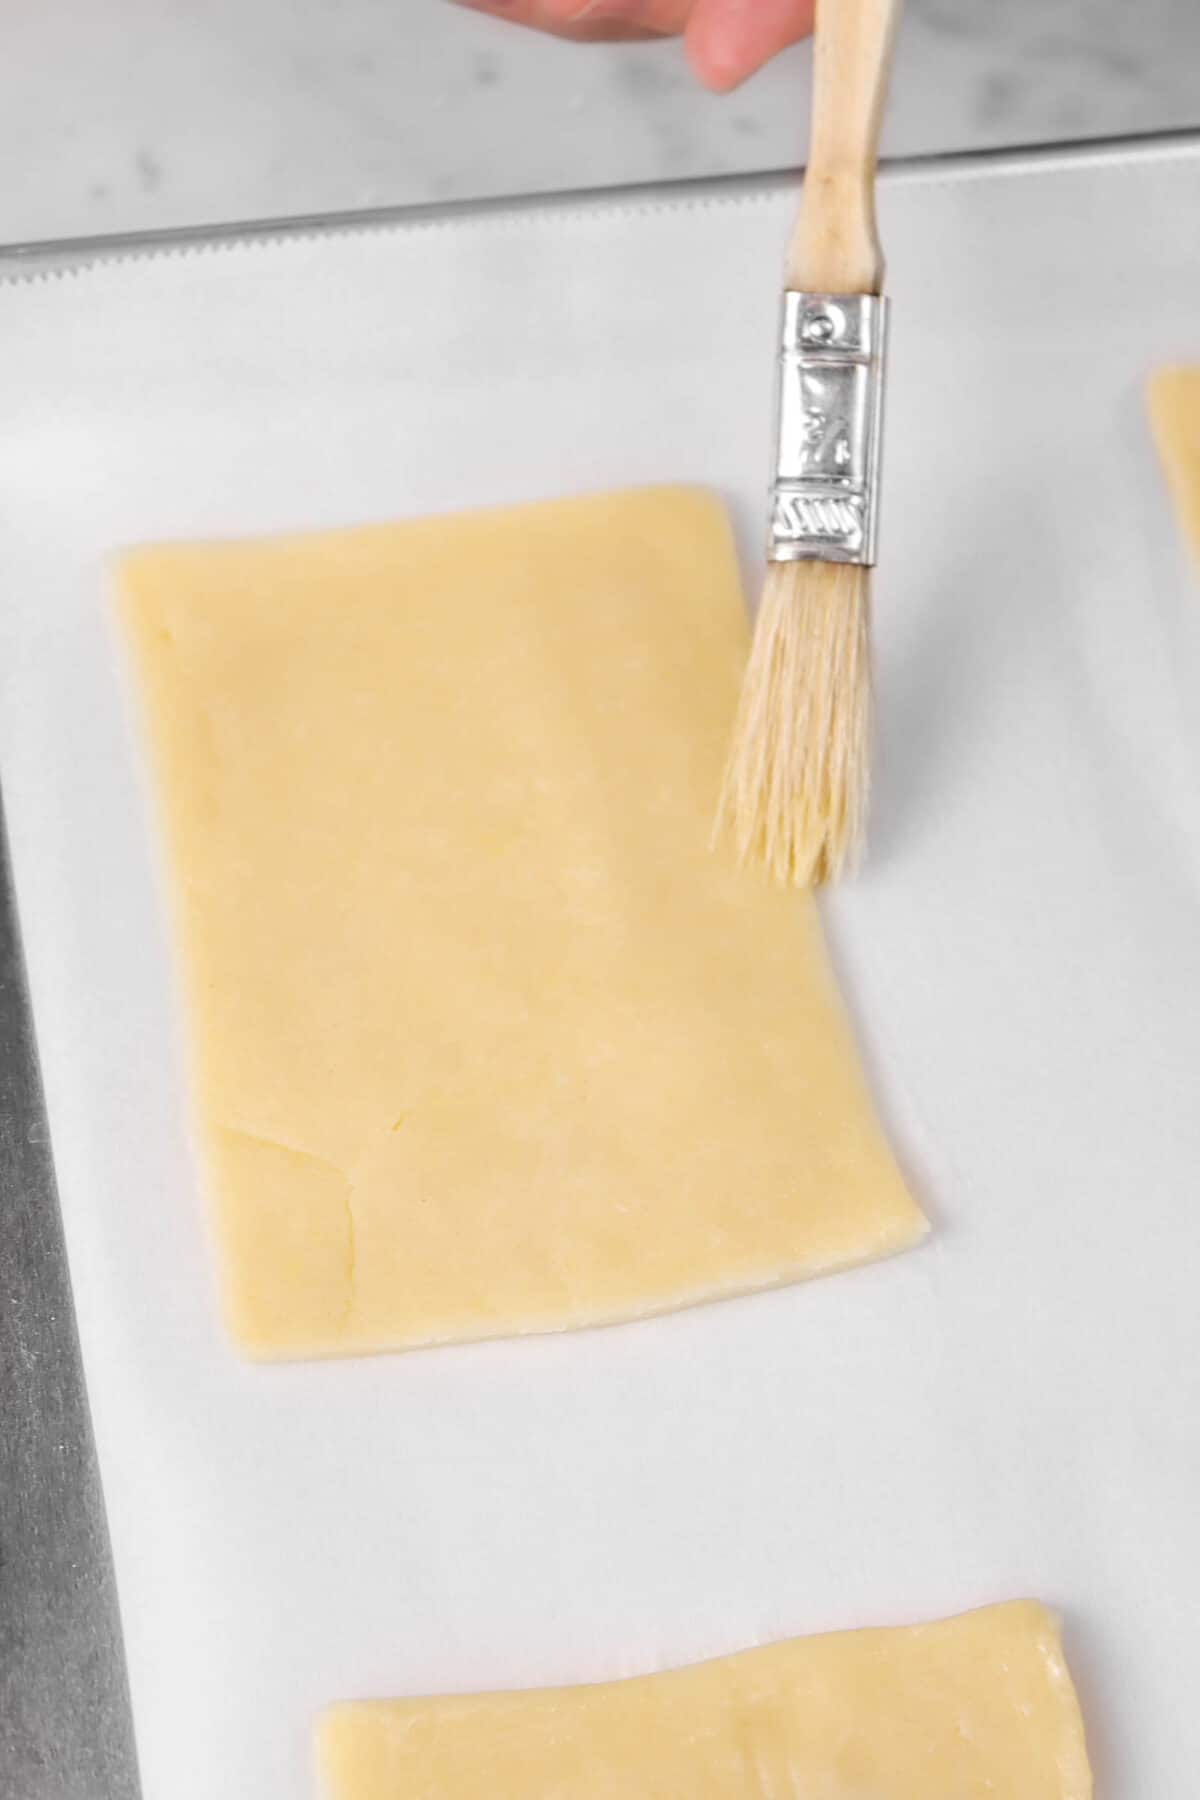 pie dough being brushed with egg wash